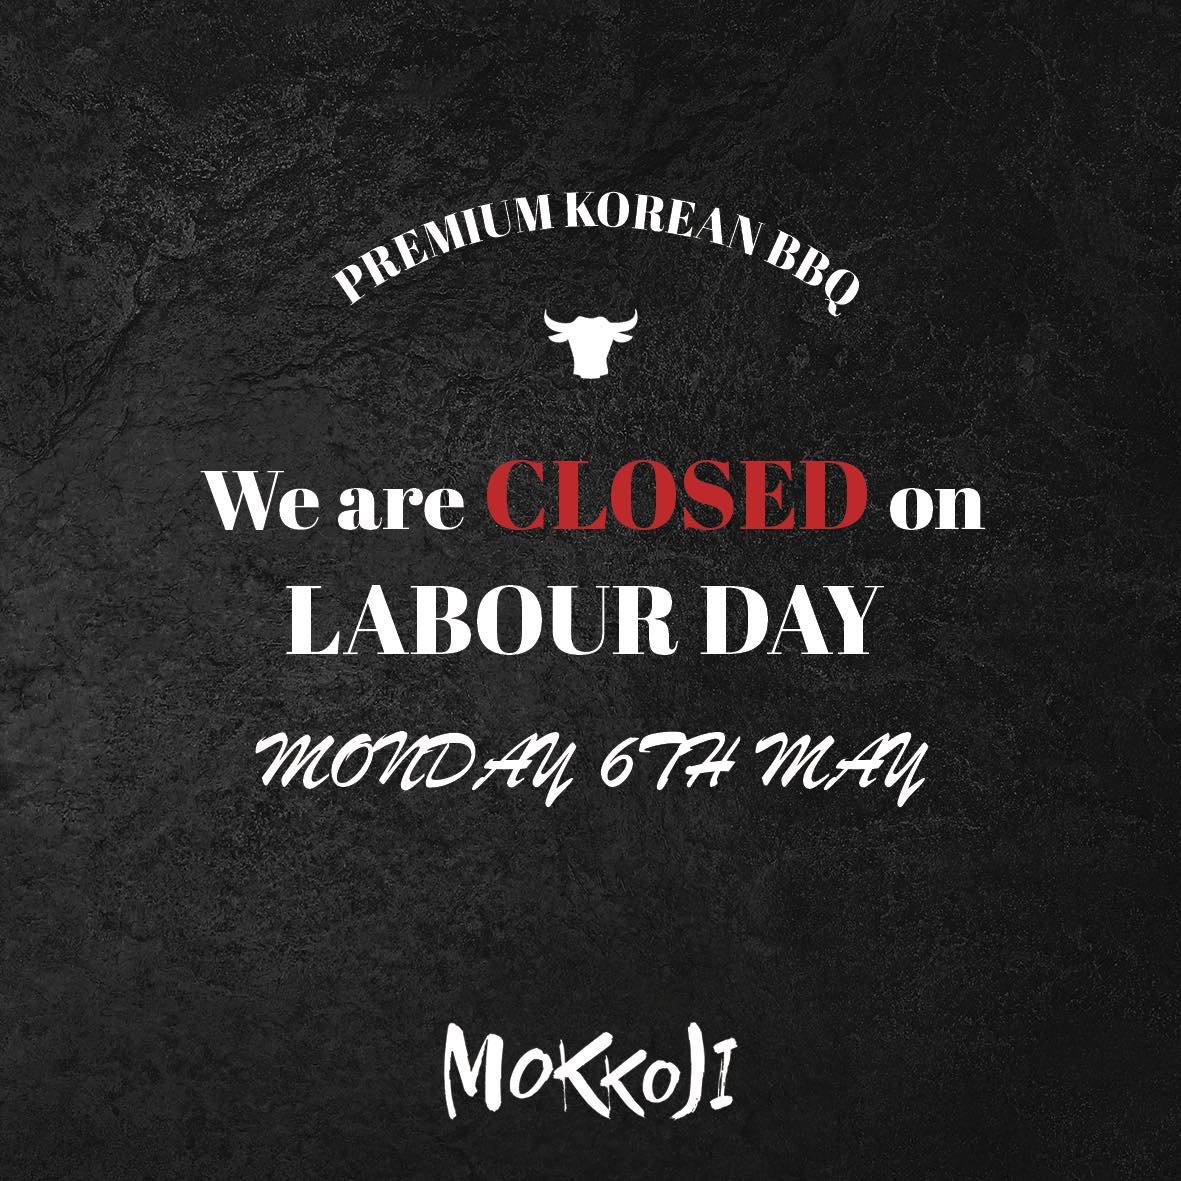 We are closed on Labour day, 6th of May. We will be back with some exiting promotion after a day off!